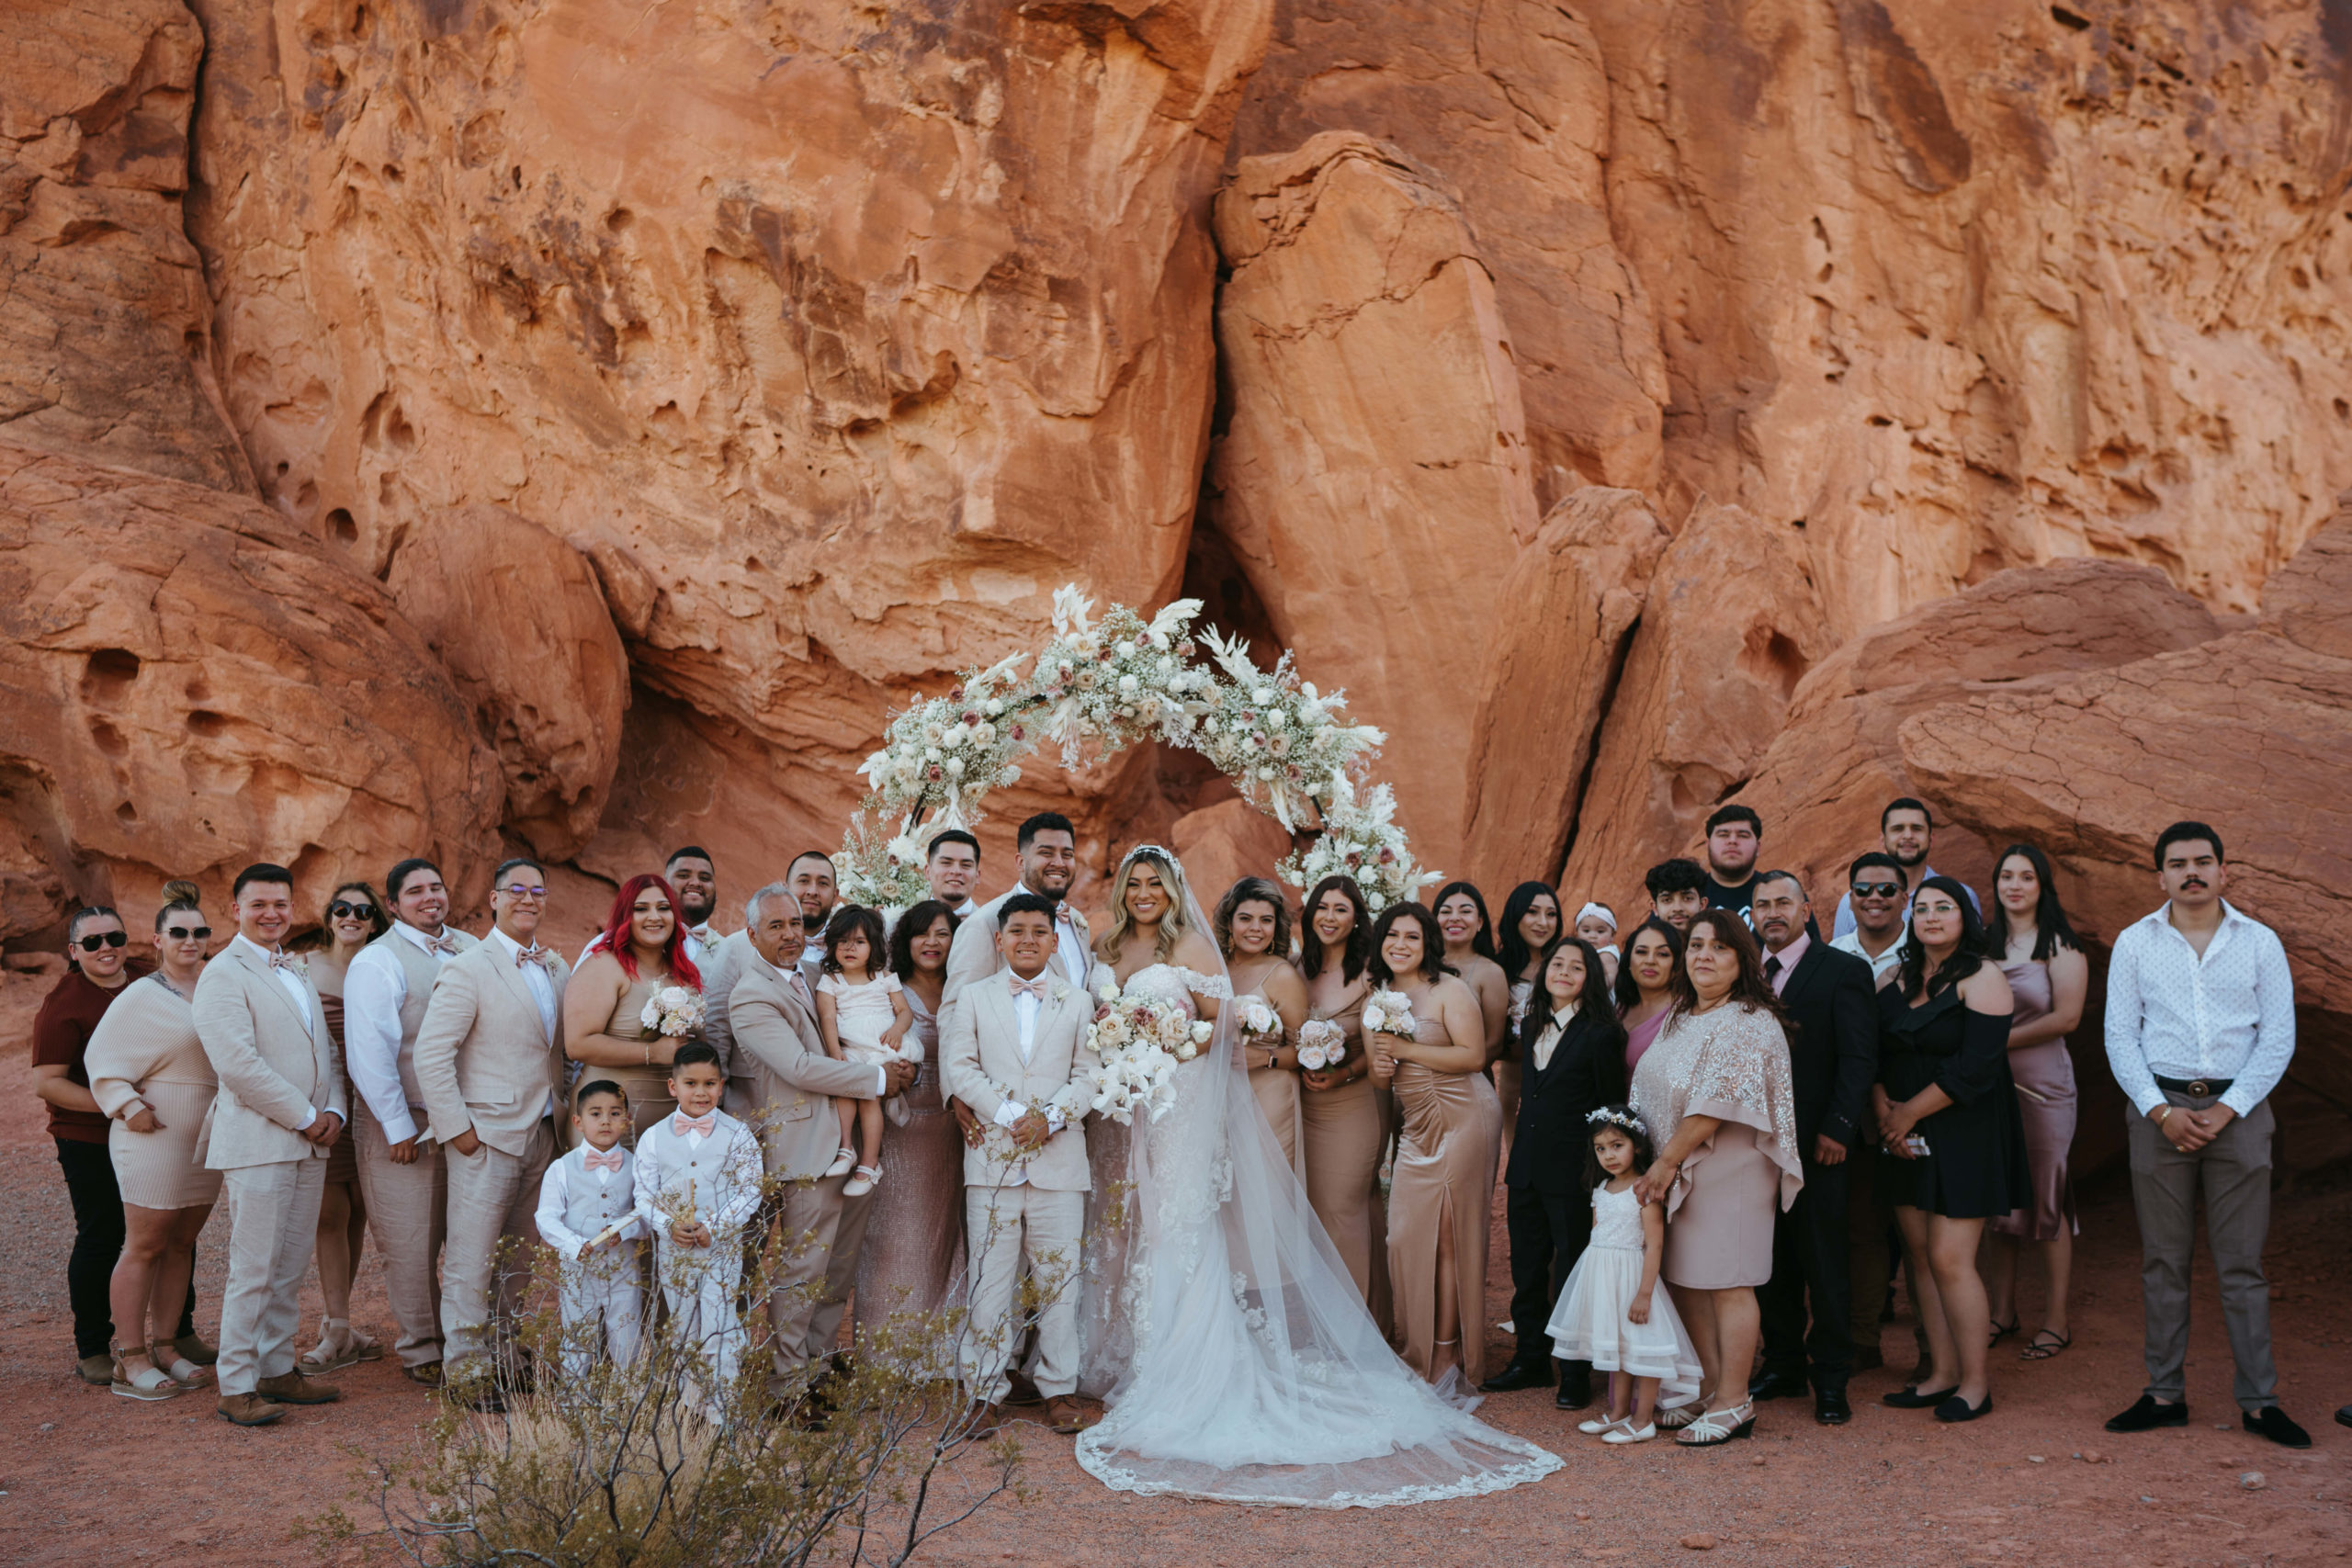 Modern Monochromatic Desert Micro-Wedding. Family and friends of the bride and groom all gather together in front of the floral arch to take a photo with the bride and groom